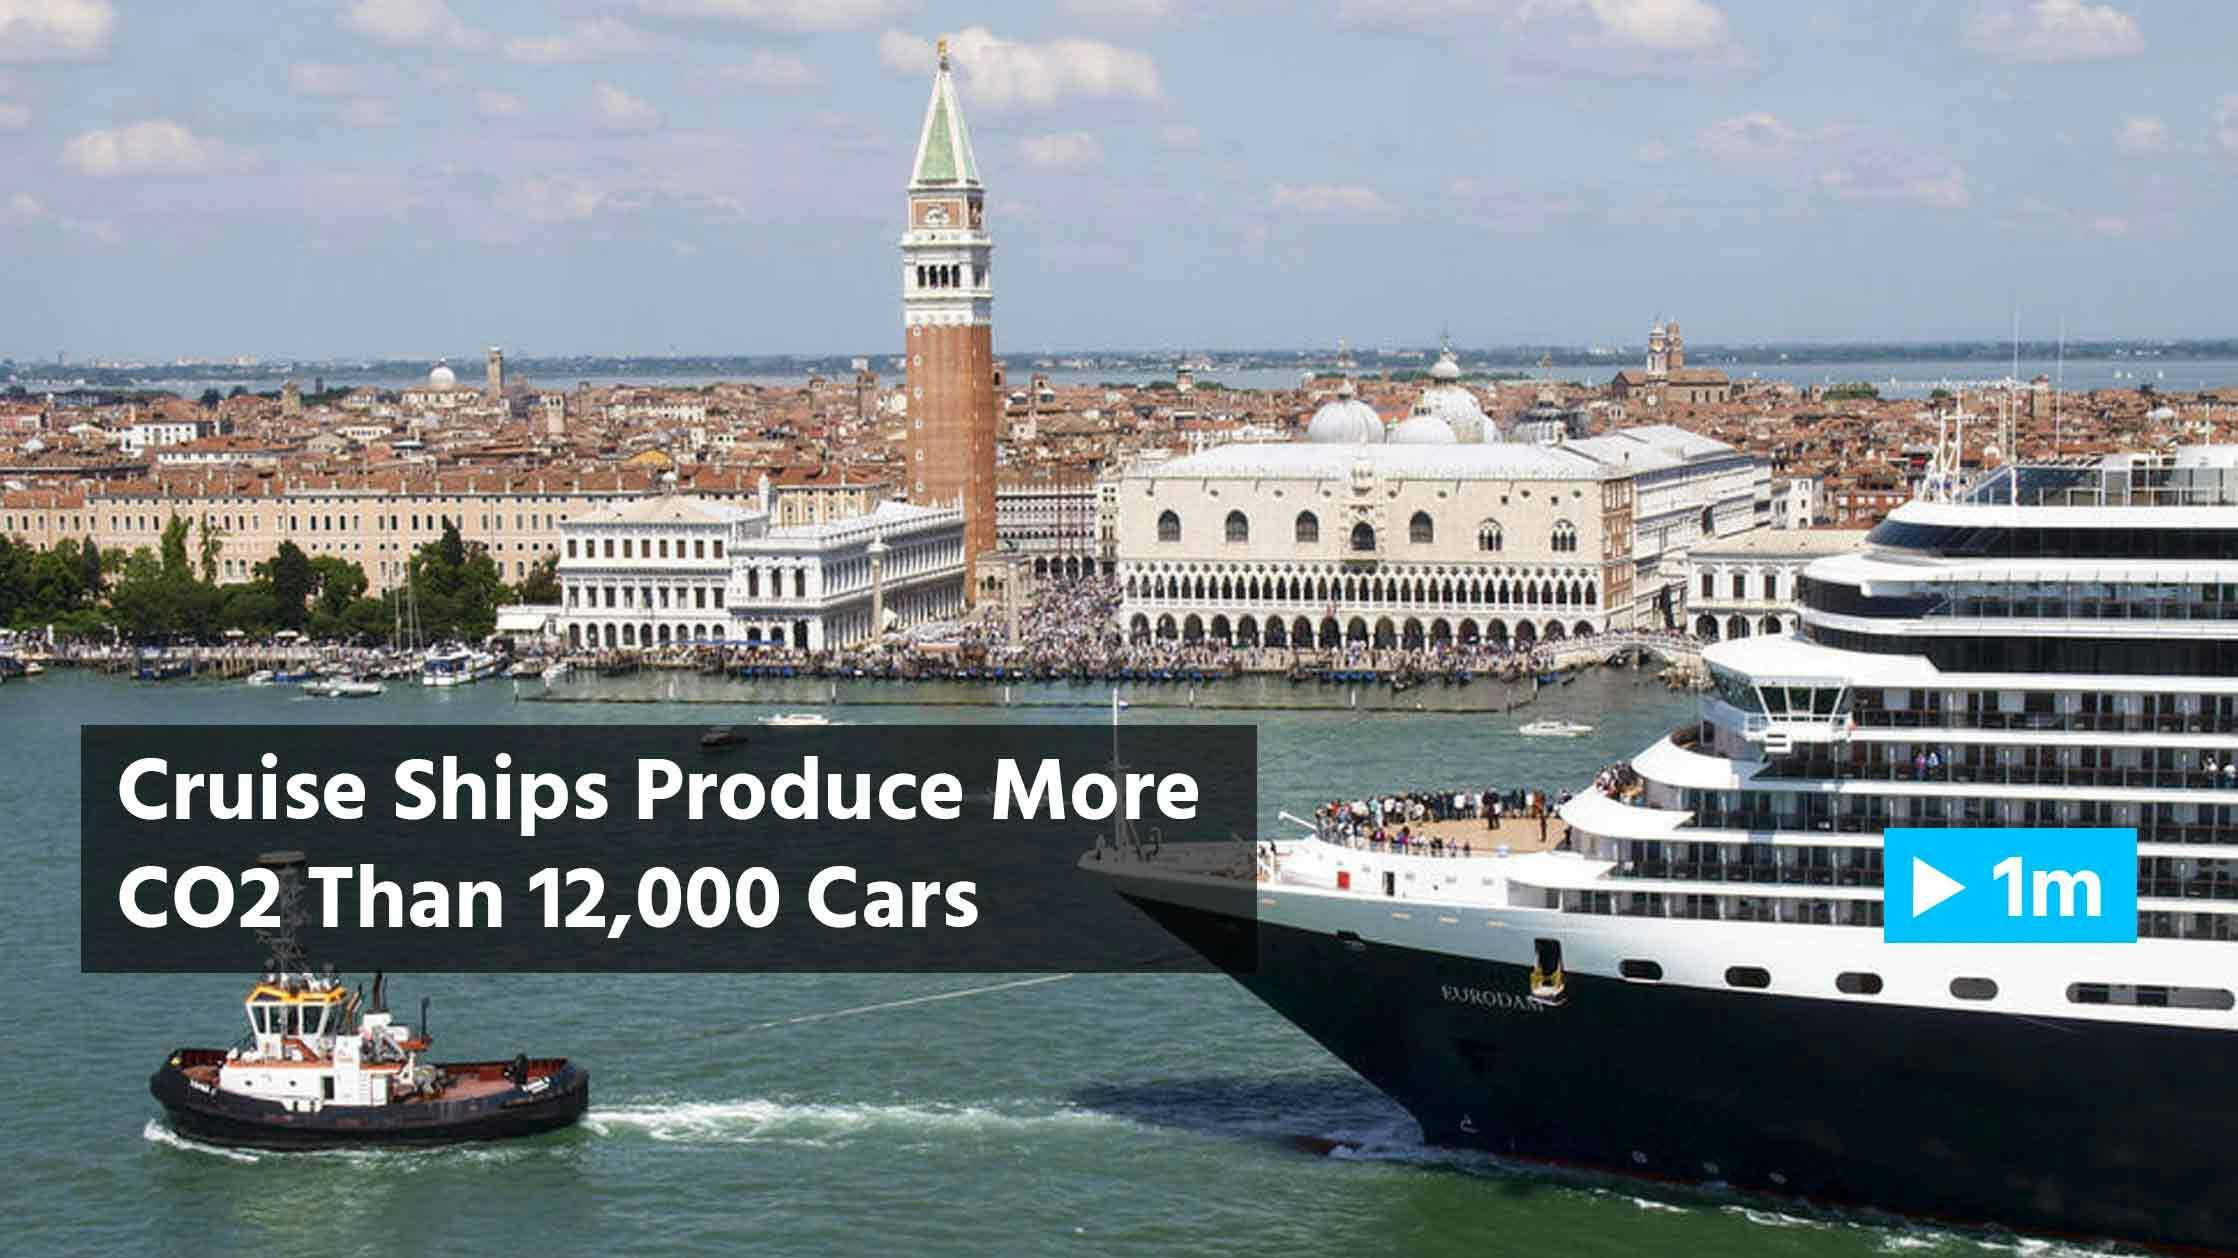 Reuters Report: Cruise Ships Produce More CO2 Than 12,000 Cars